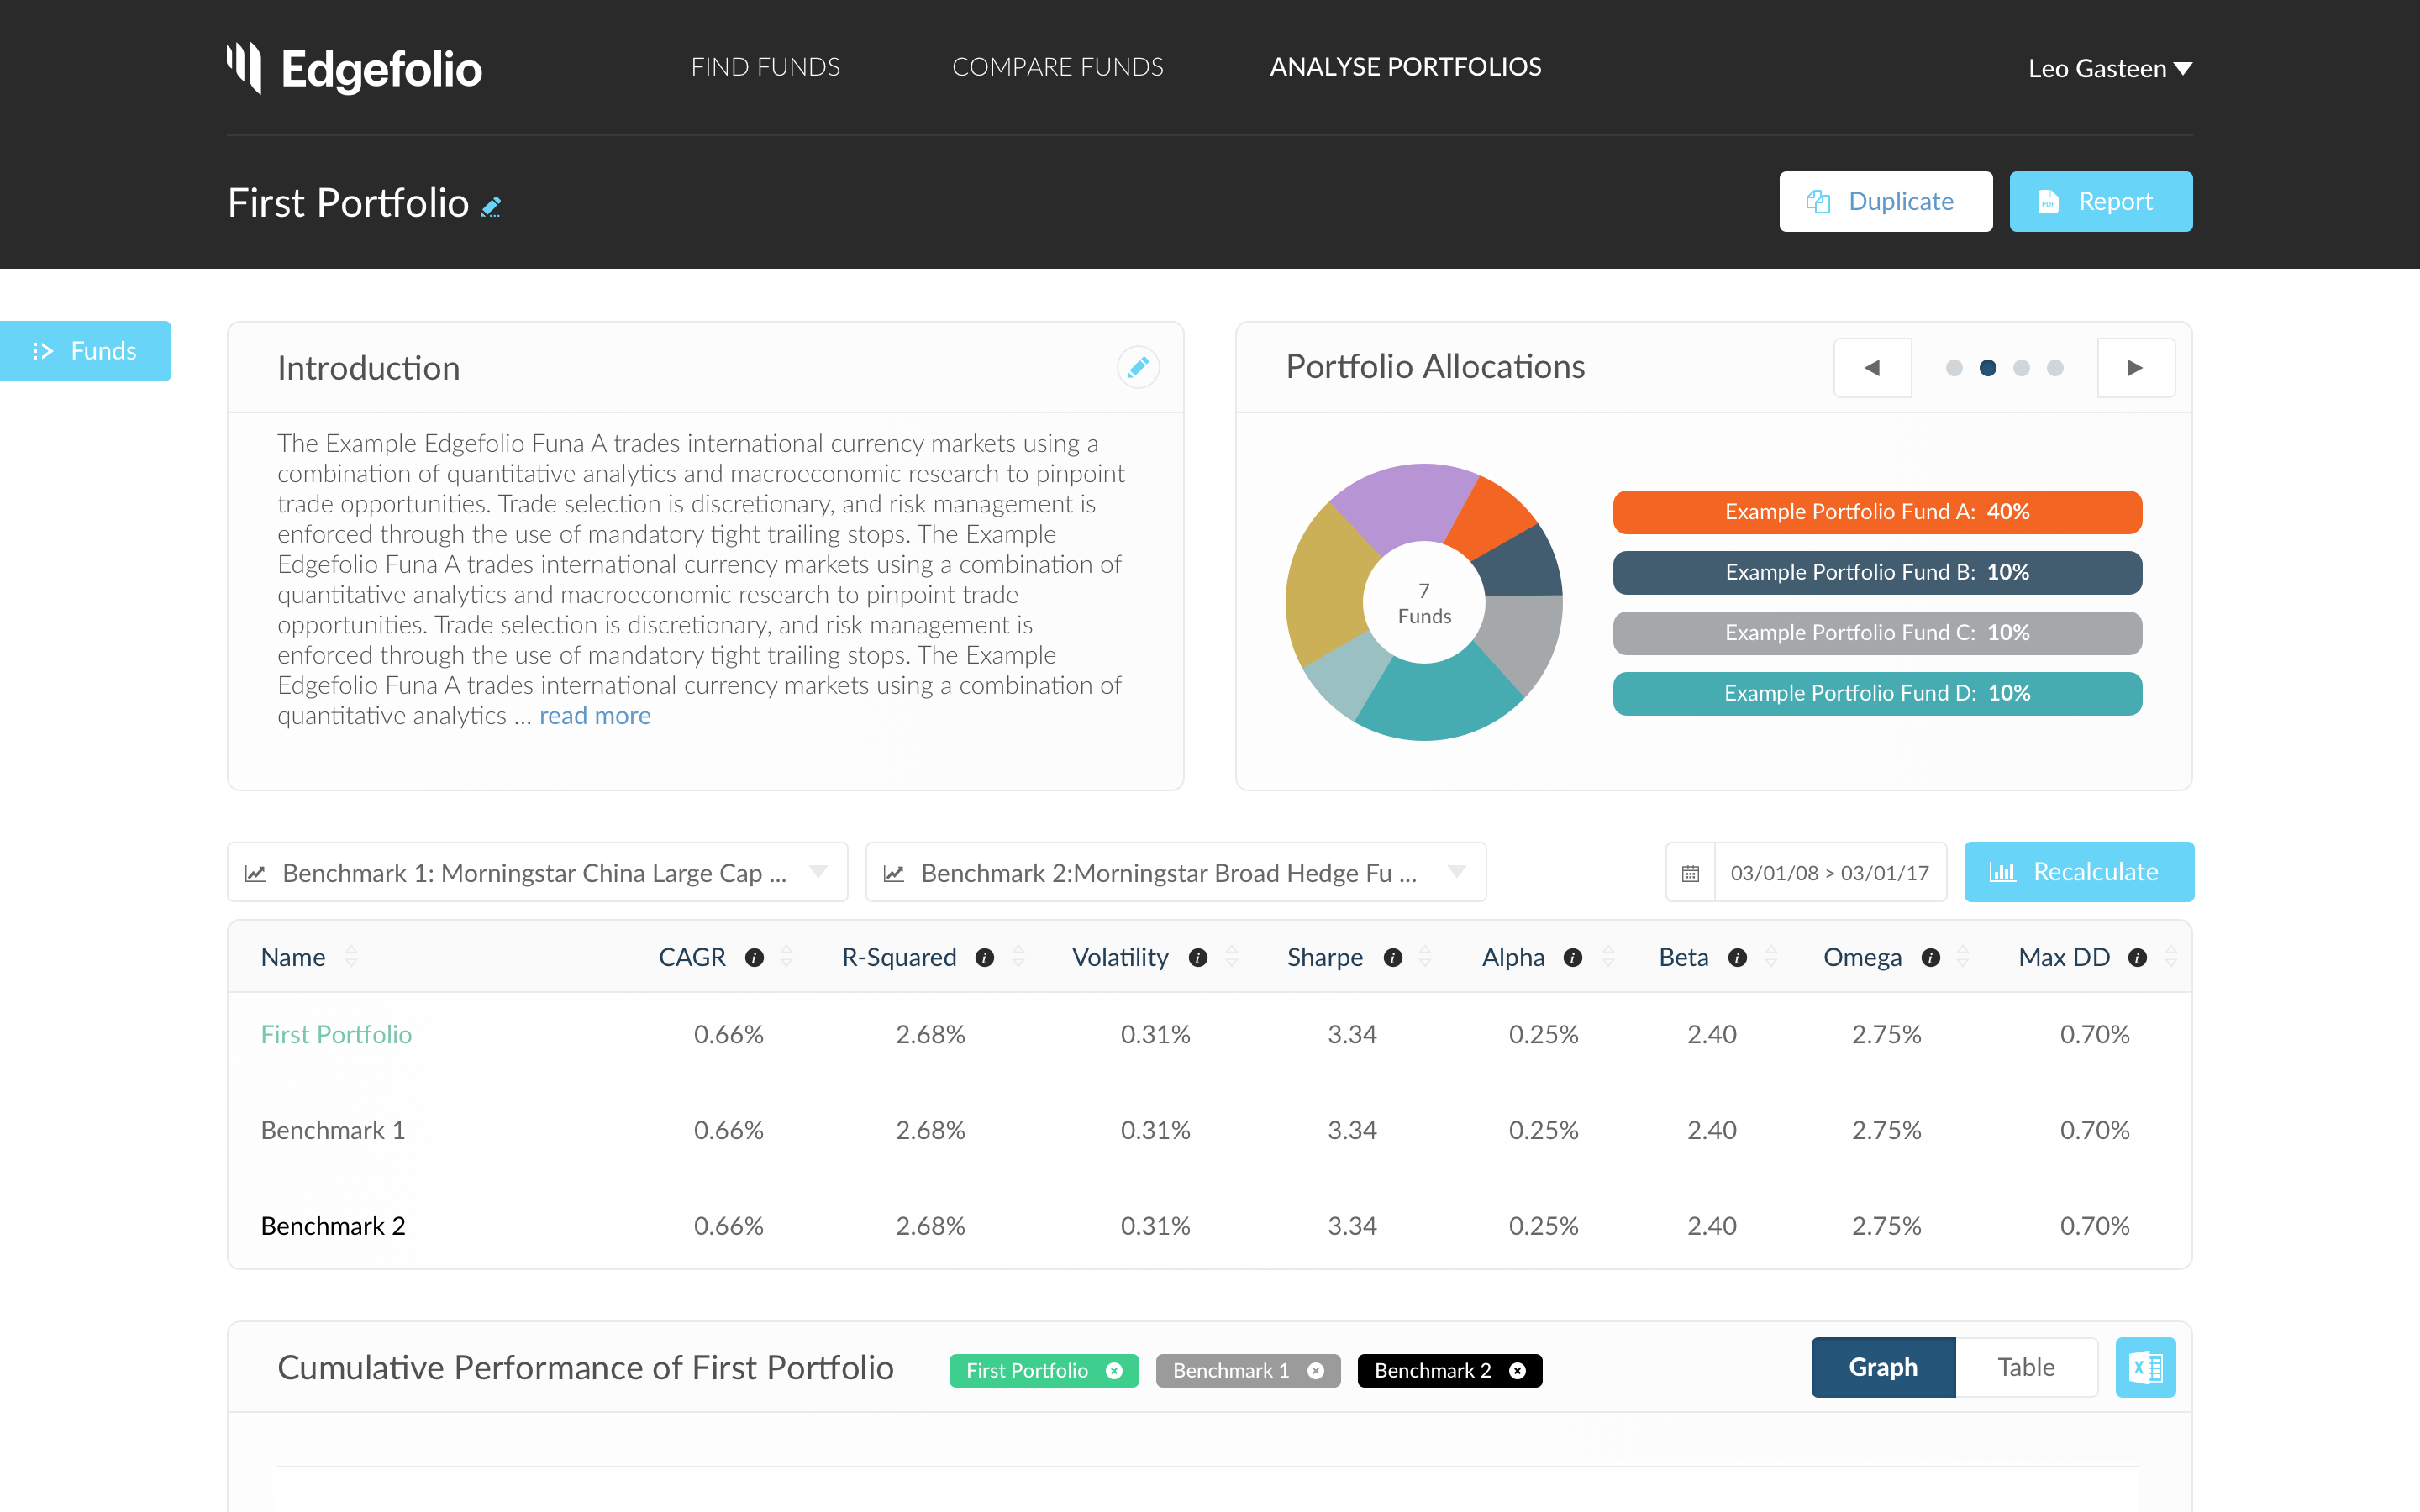 Track the funds you are interested in